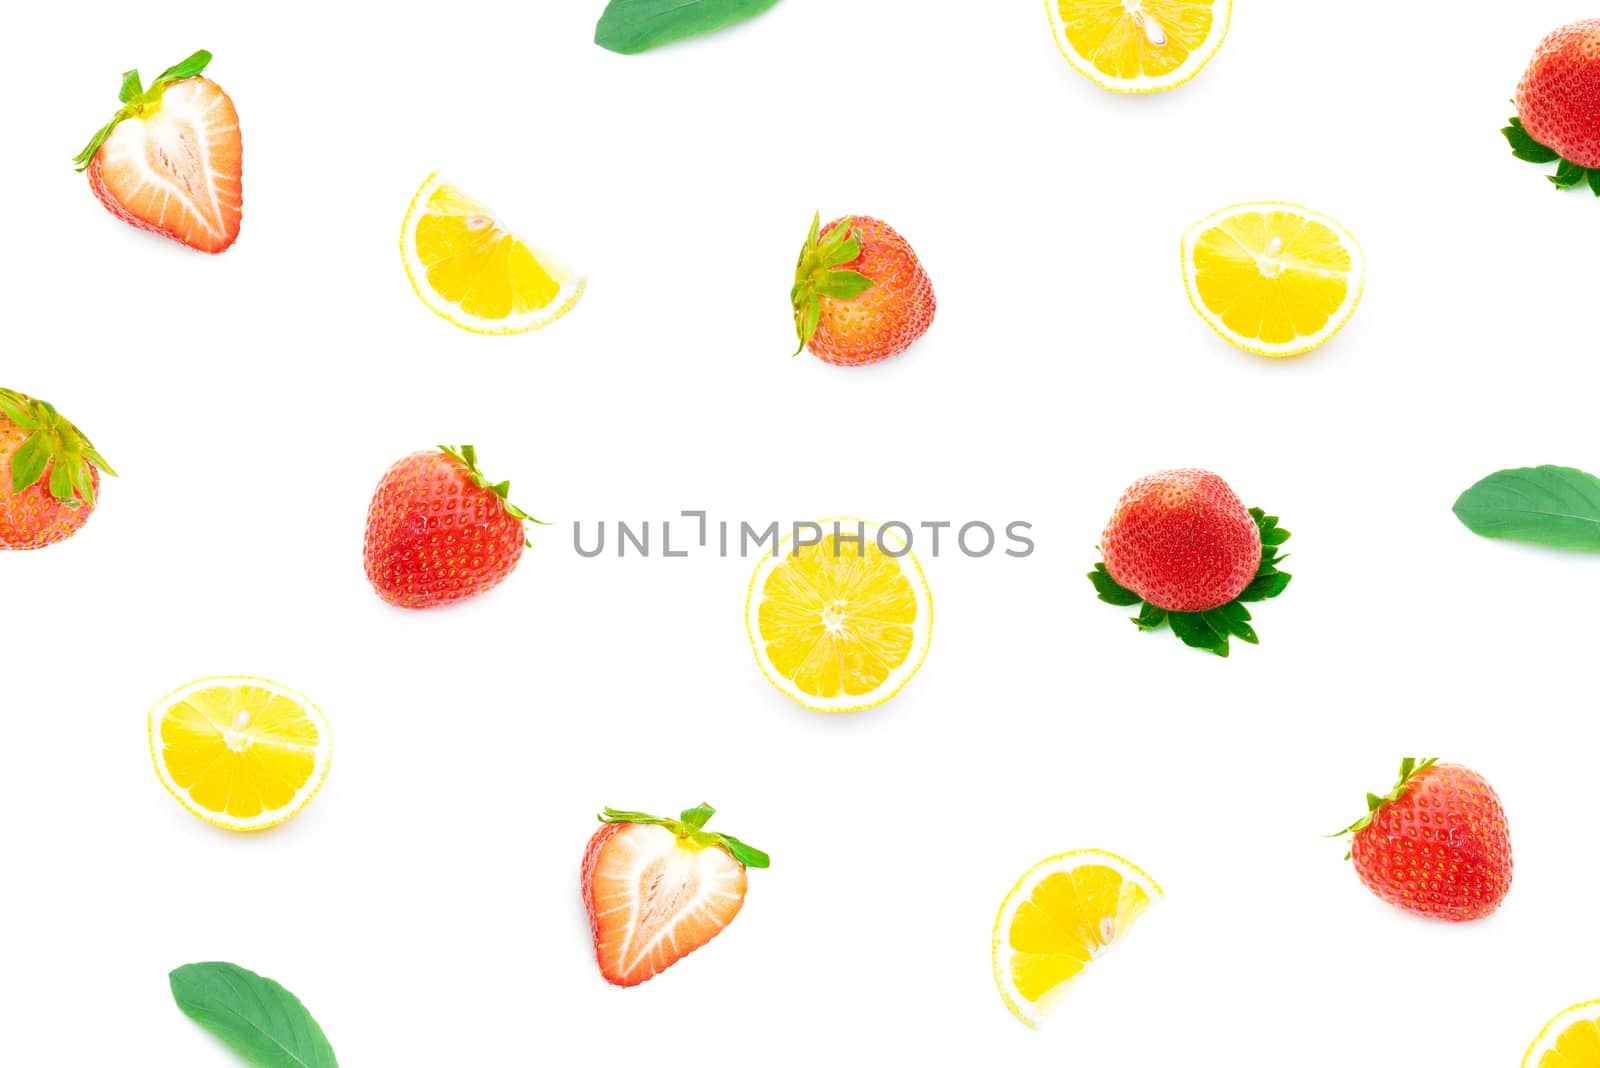 Refreshing Strawberry and lemon on a white background by sompongtom